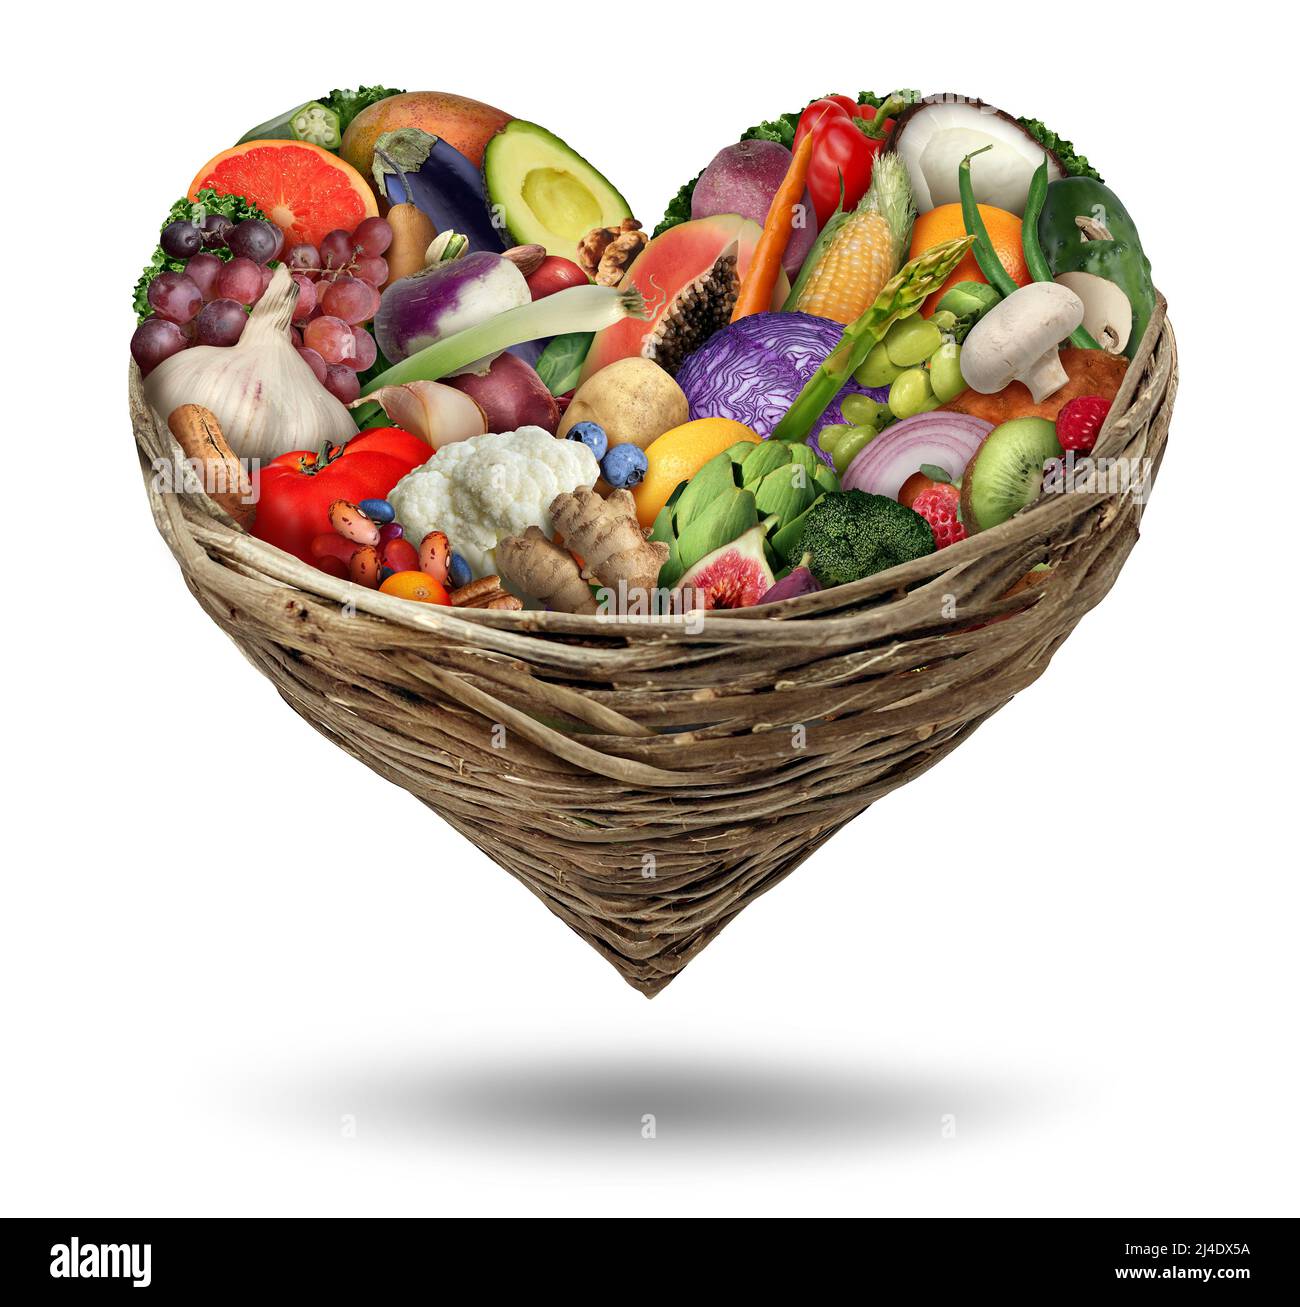 Fruit and vegetables love and heart health symbol in a cornucopia basket as a healthy food and fresh ripe fruits and nuts with beans as a diet. Stock Photo